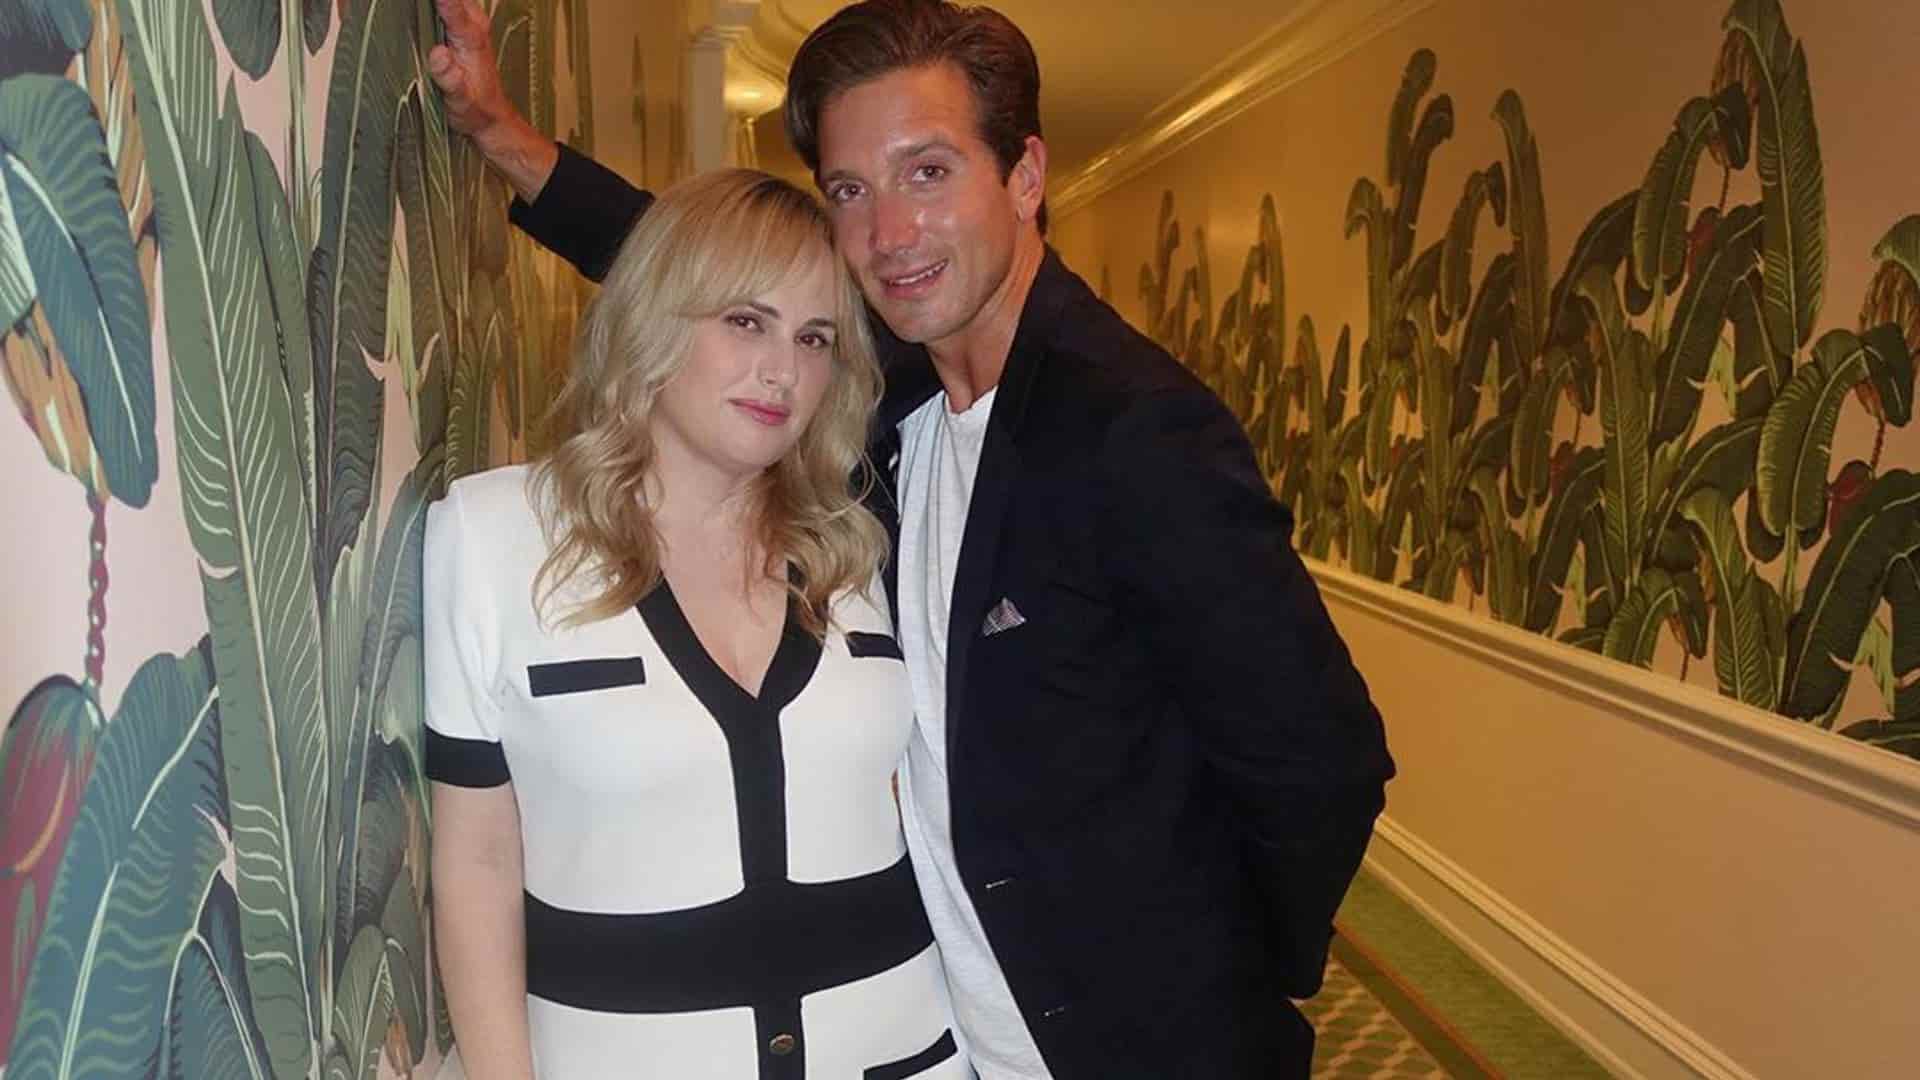 Image of Jacob Busch with his girlfriend, Rebel Wilson